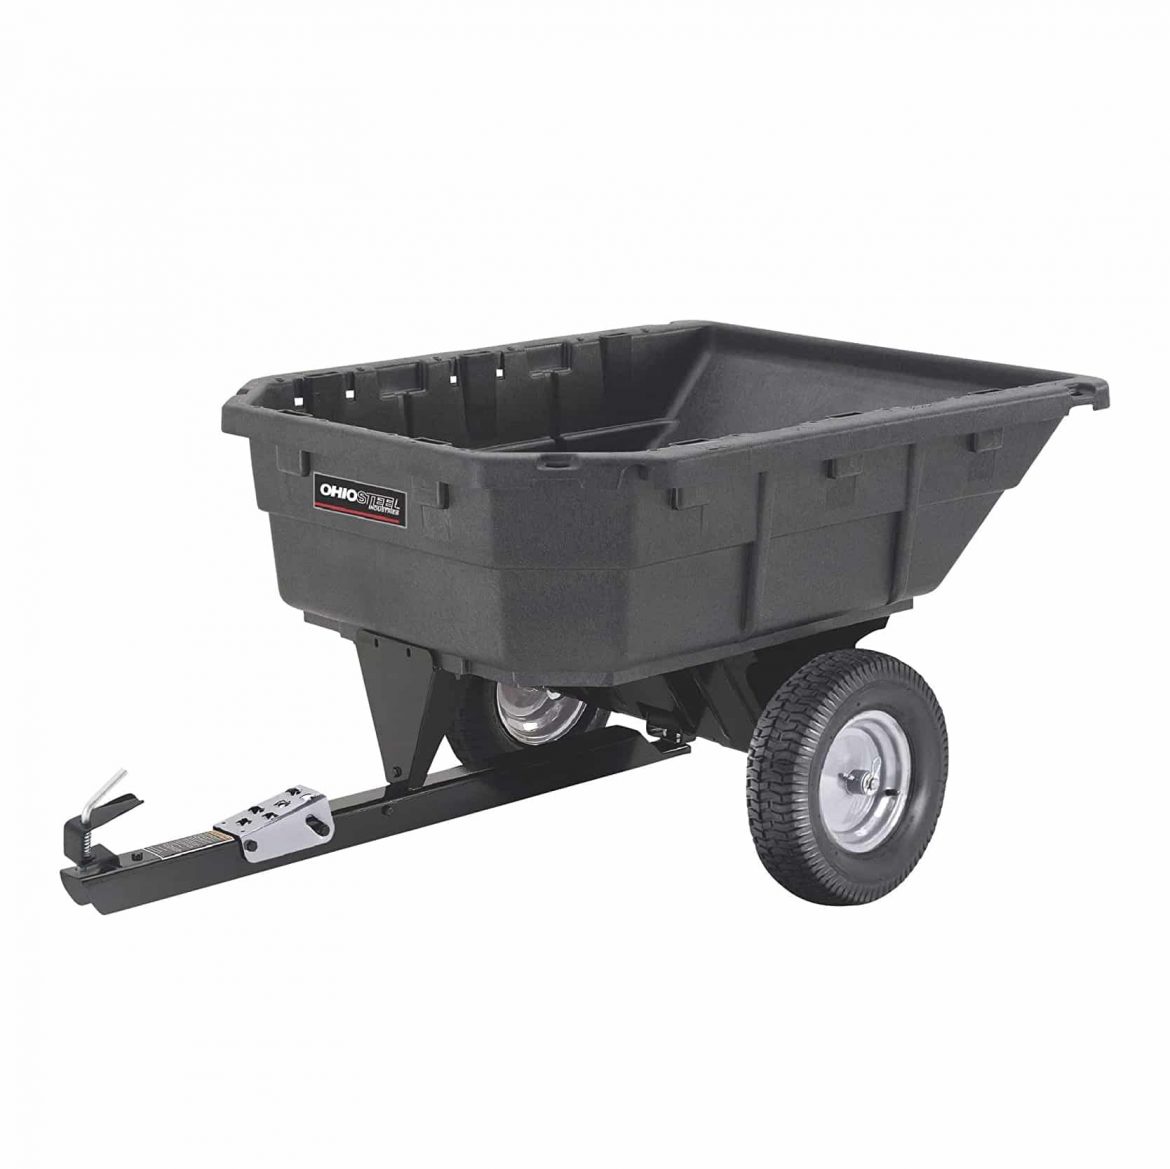 Top 10 Best Tow Behind Dump Cart for Lawn Tractors in 2021 Reviews